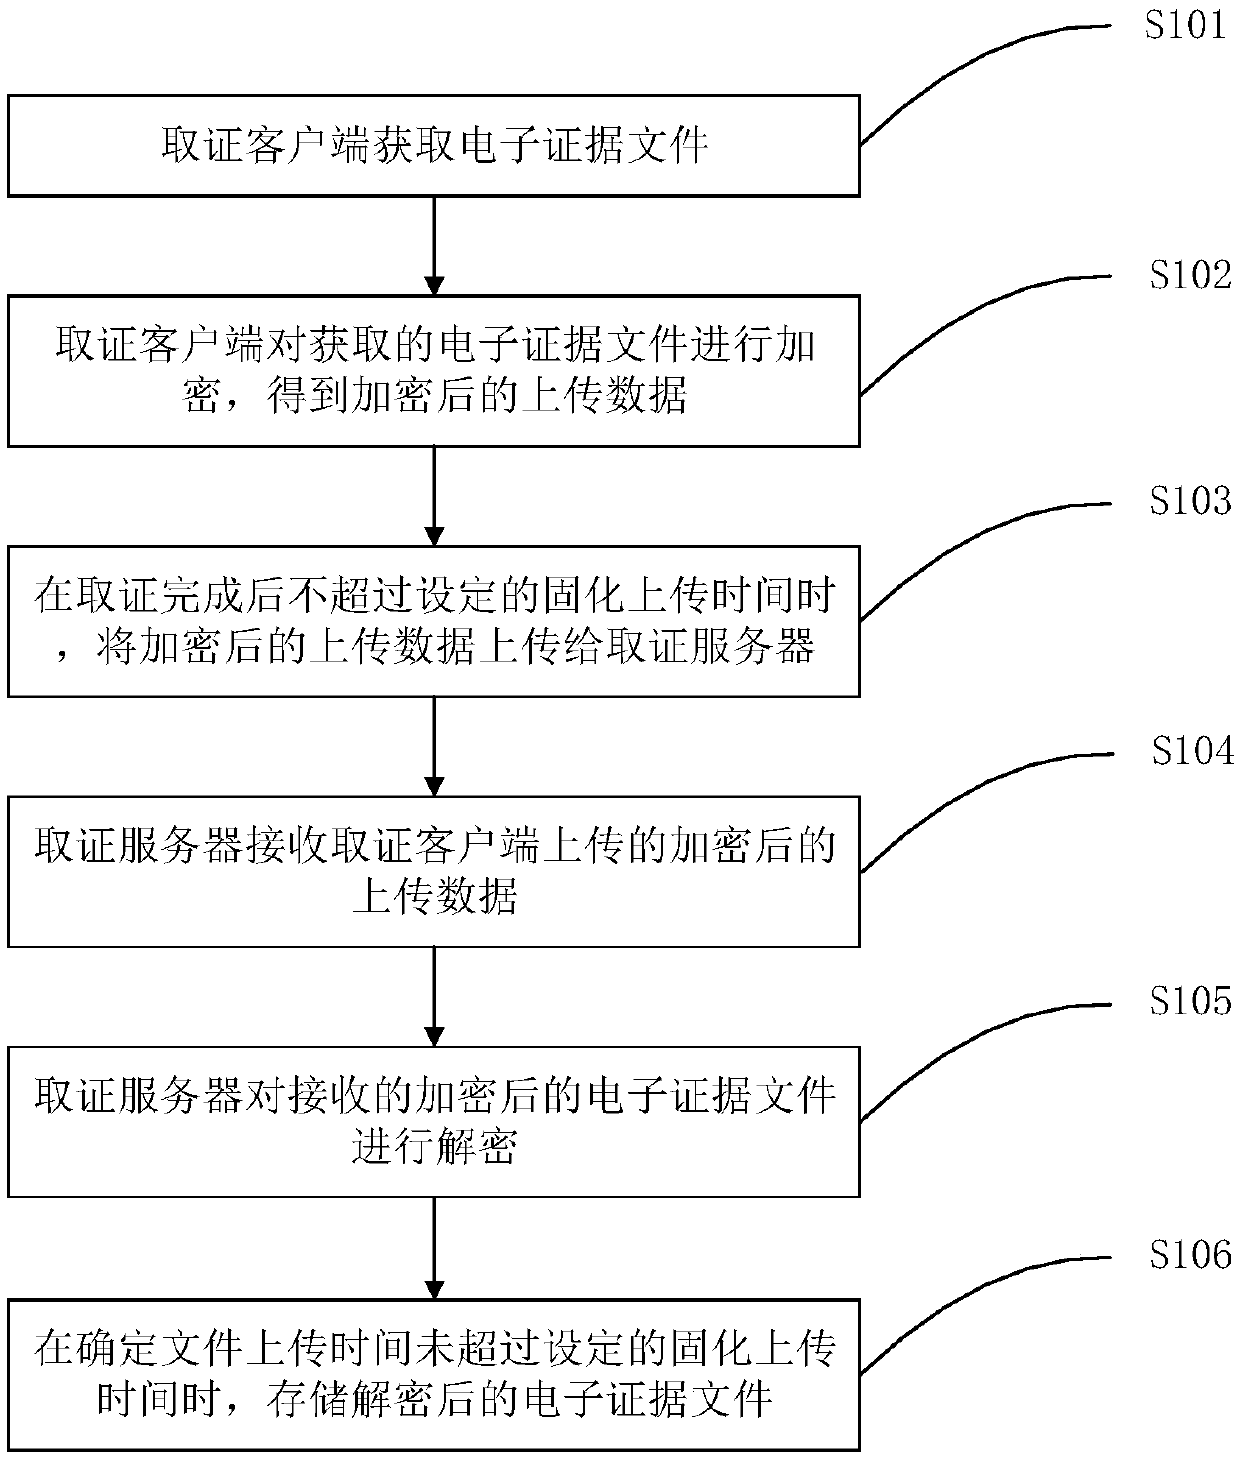 Electronic evidence consolidation method and system, and equipment